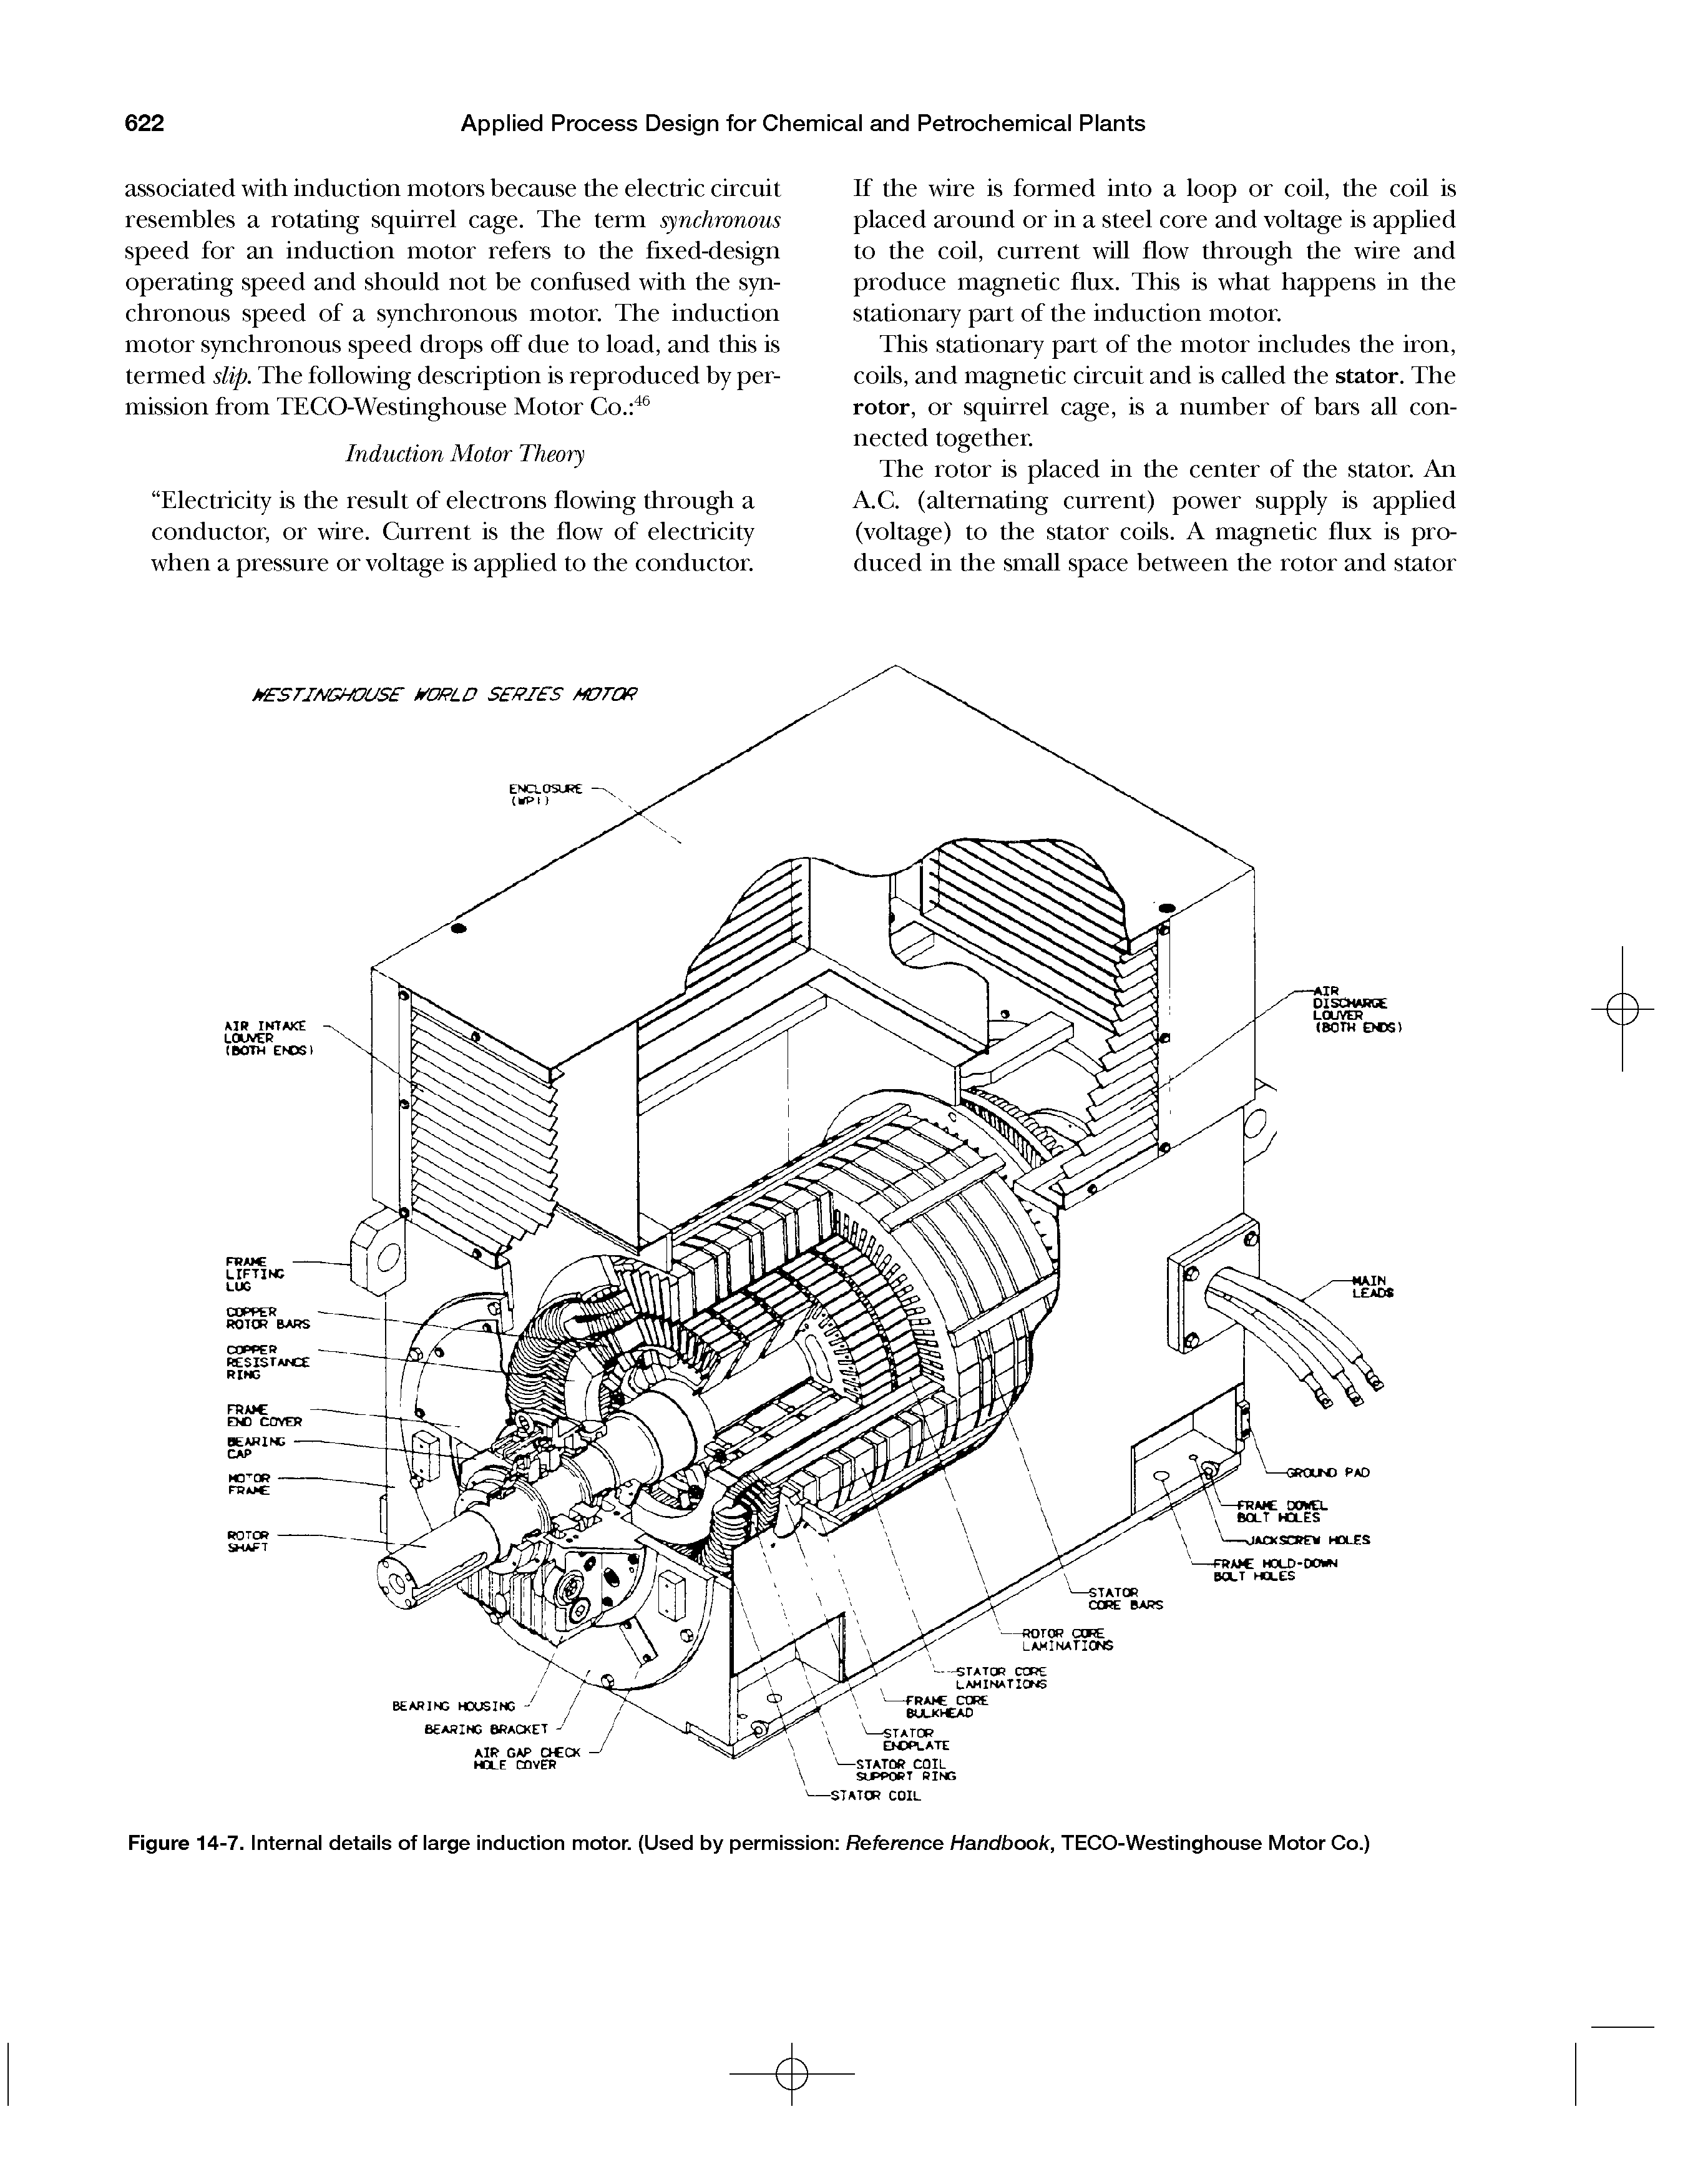 Figure 14-7. Internal details of large induction motor. (Used by permission Reference Handbook, TECO-Westinghouse Motor Co.)...